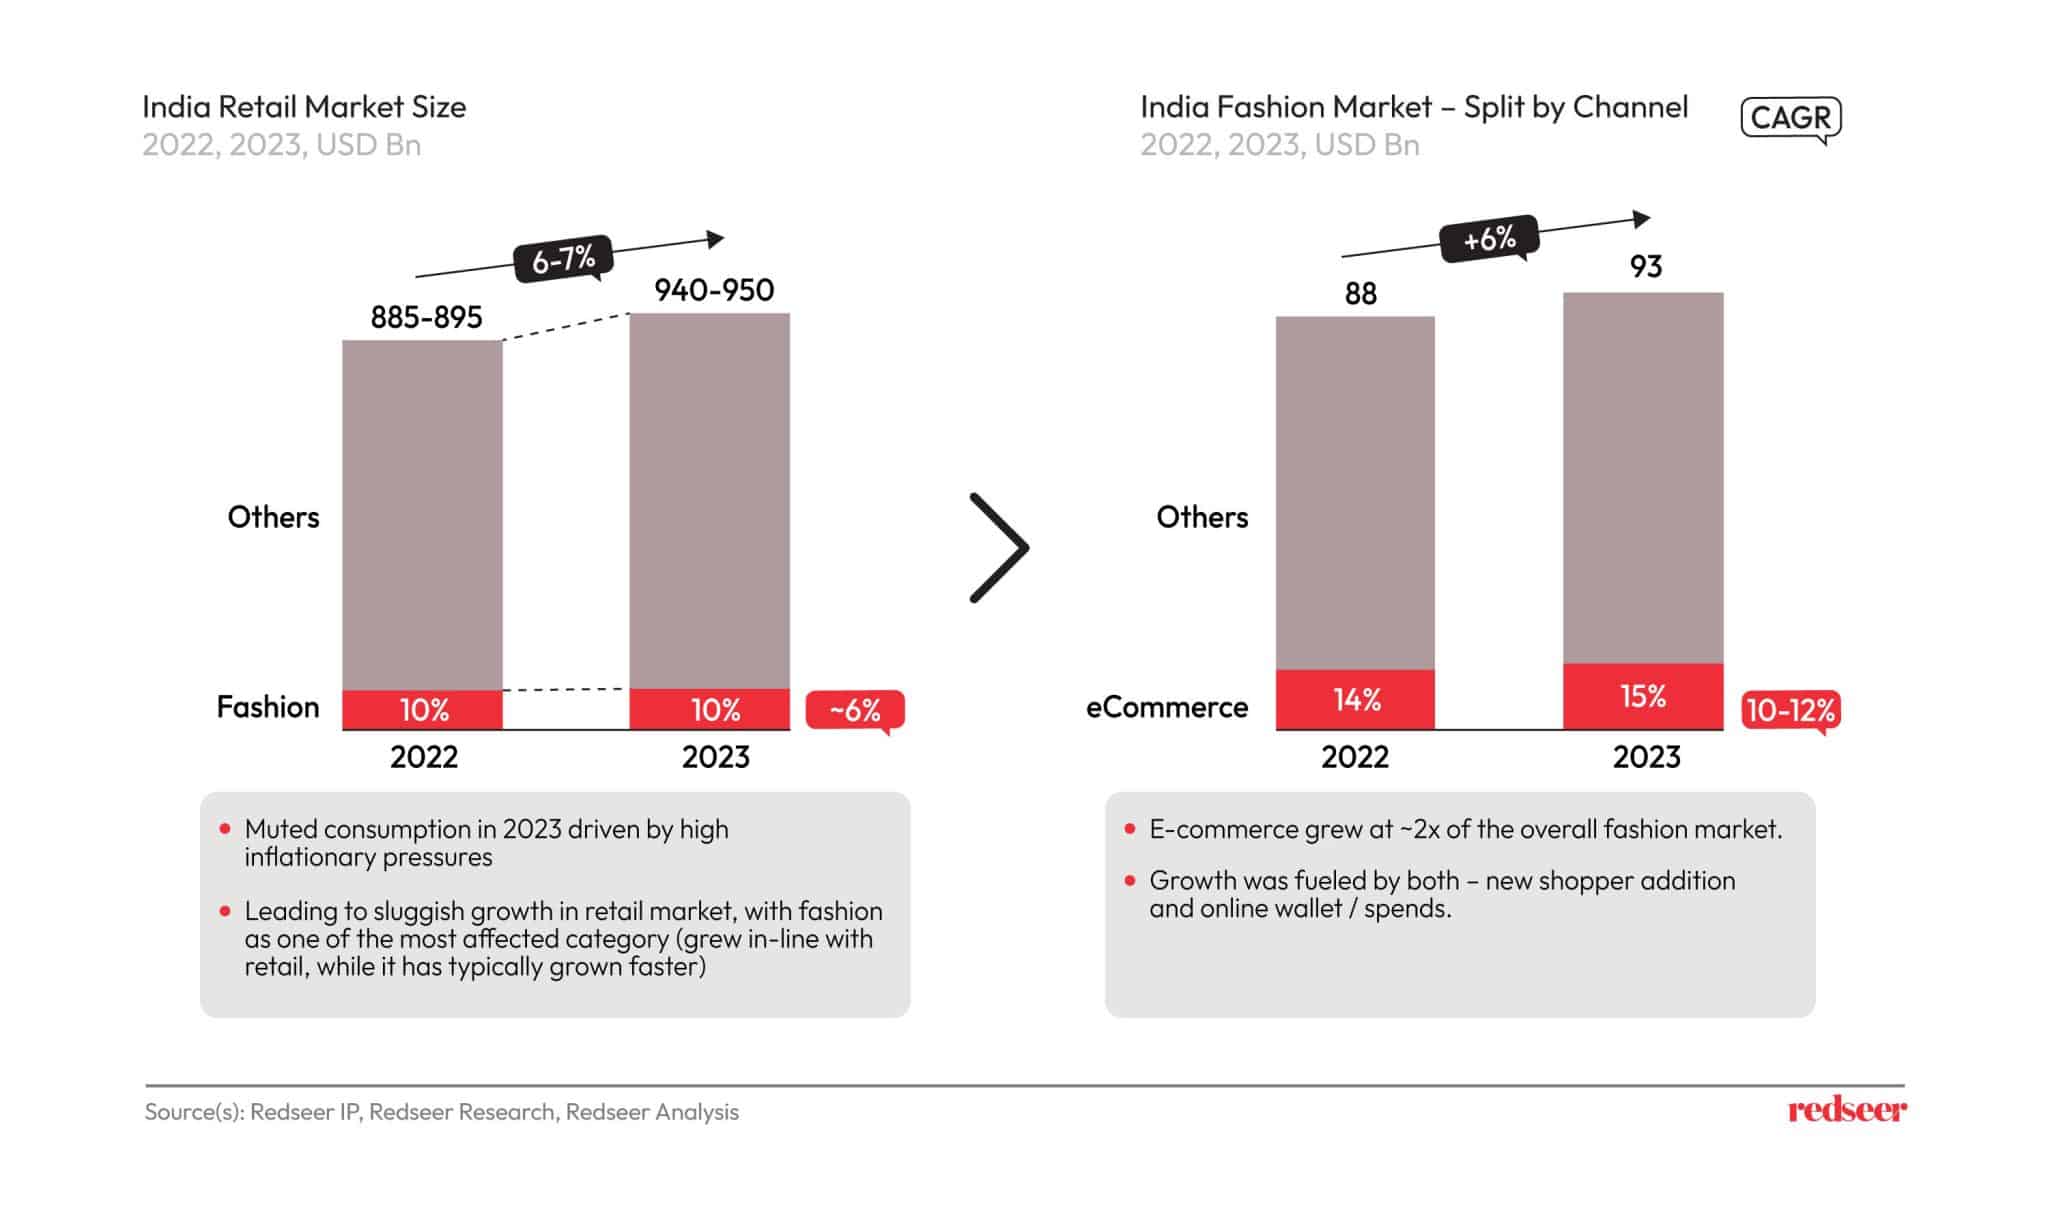 India Retail Market Size | Redseer Strategy Consulting